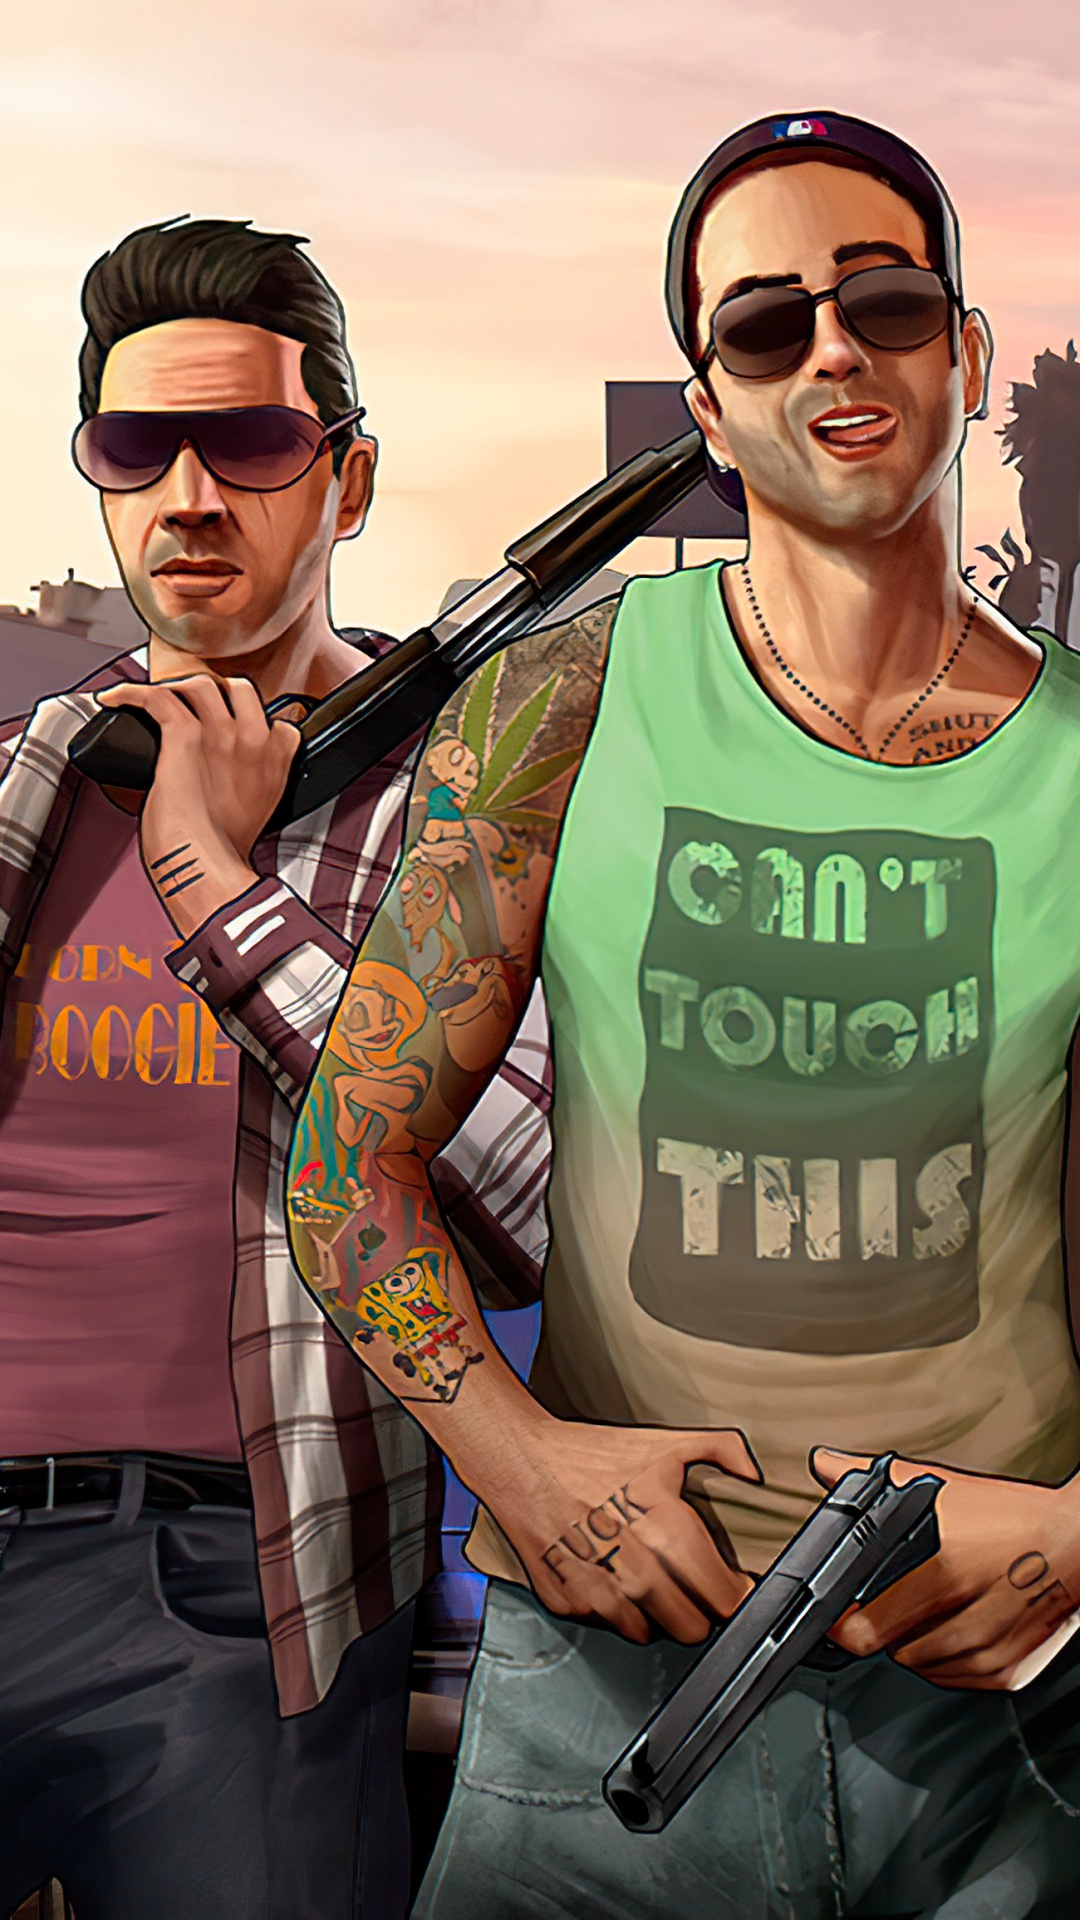 Chillin With The Homies, Grand Theft Auto v, Rockstar Games, Human, Eyewear. Wallpaper in 1080x1920 Resolution